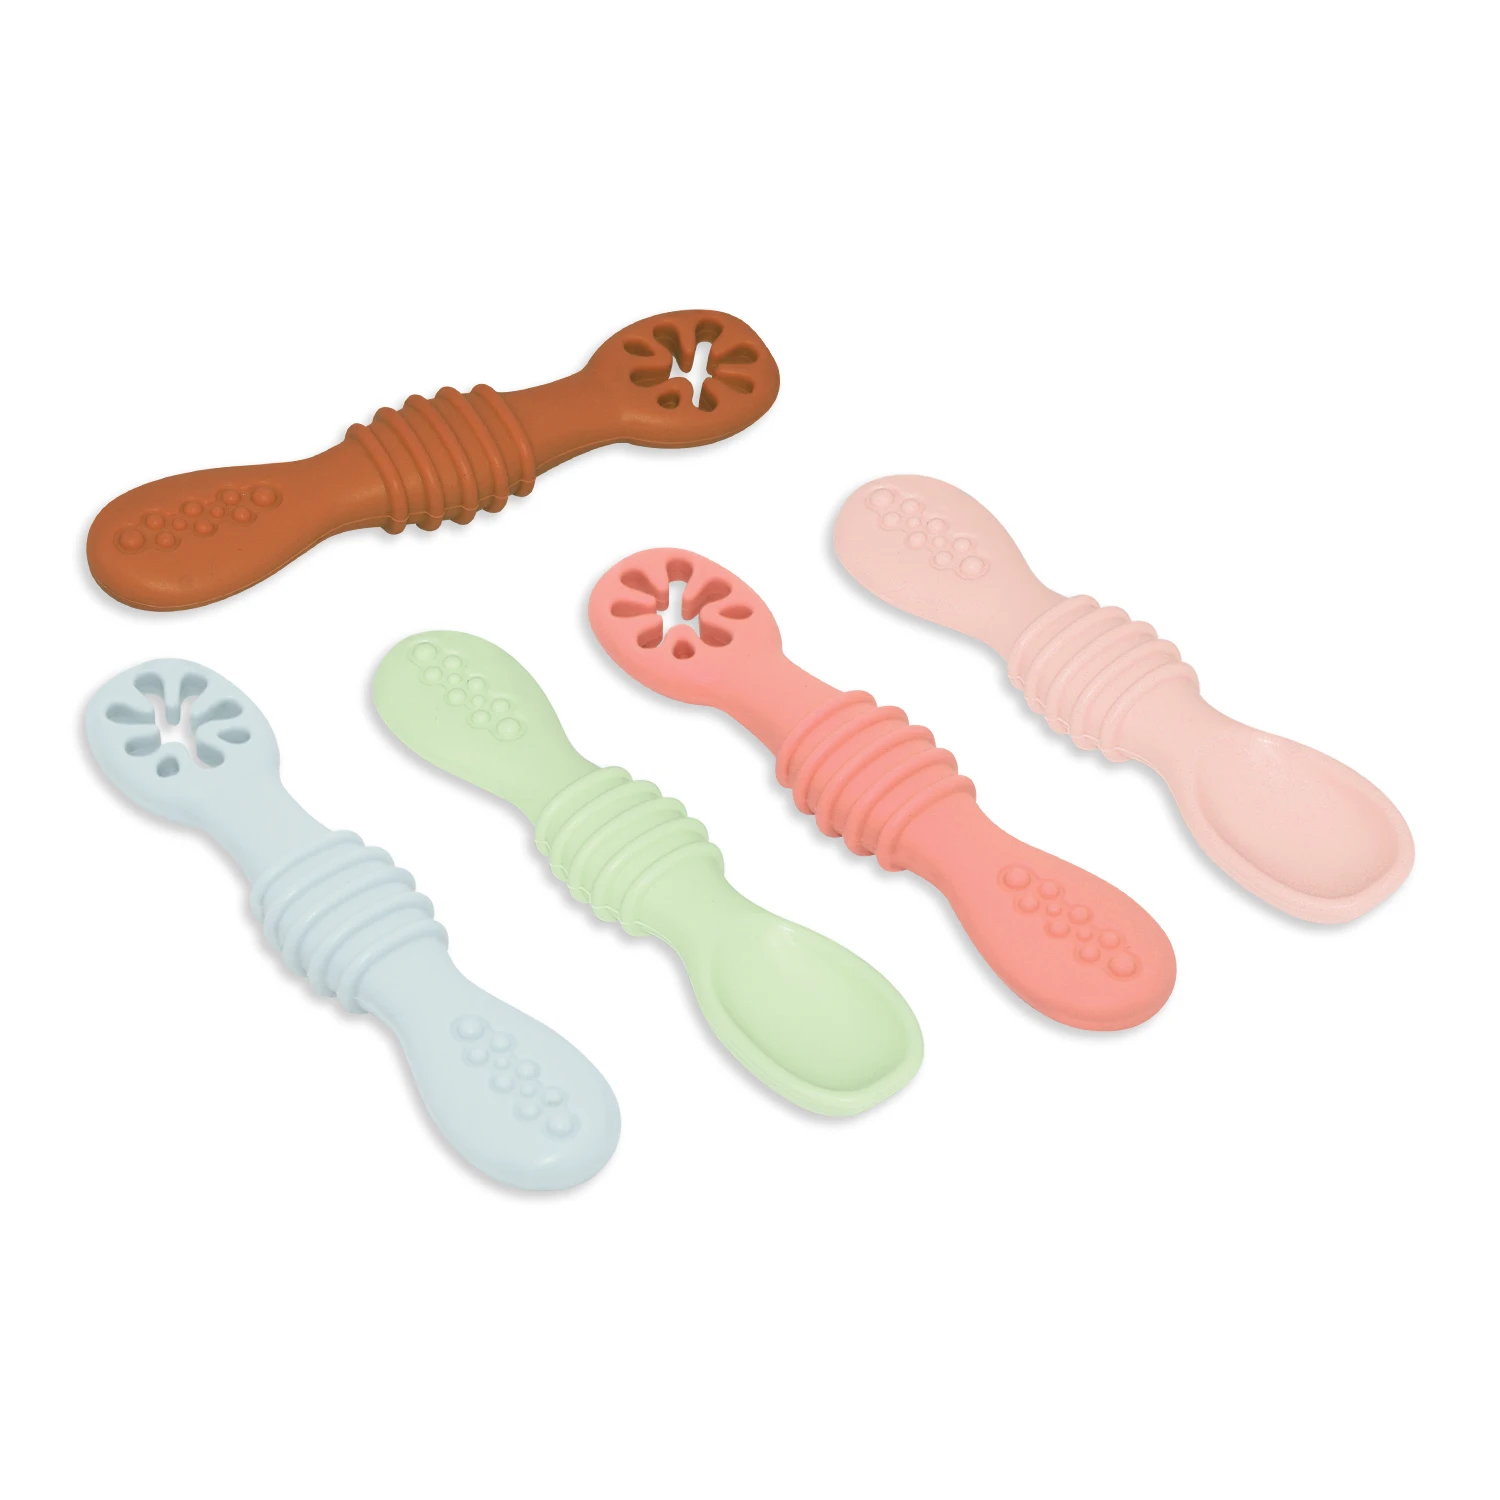 

Silicone BPA Free Eco-friendly Soft Toddler Babies Children Feeding Training Baby Spoon Silicone Spoon, Blue,green, pink